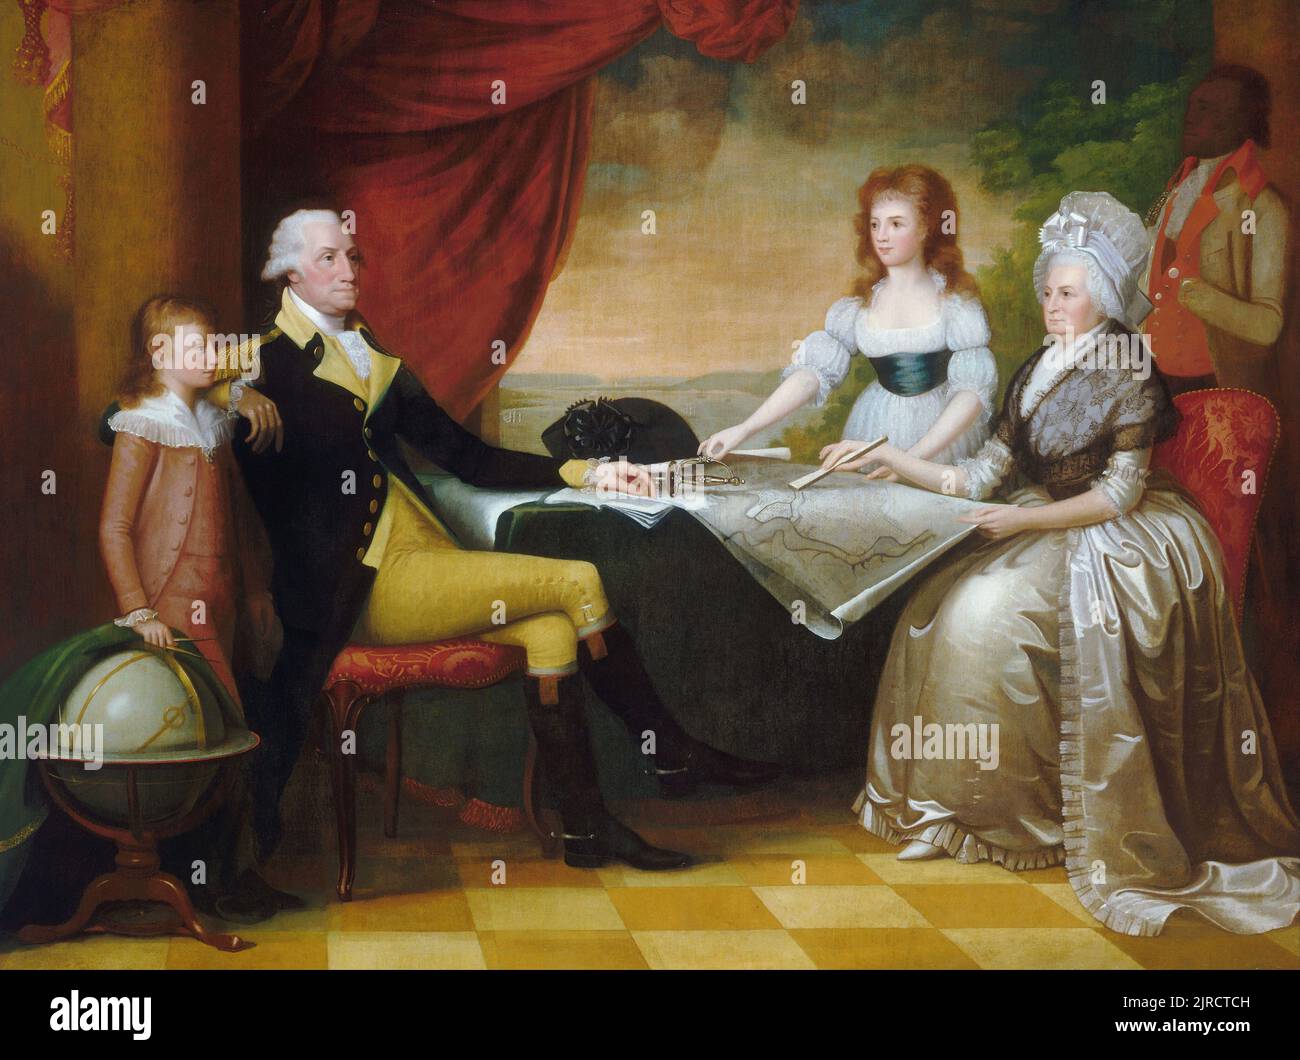 Washington's Family by Edward Savage, painted between 1789 and 1796, shows (from left to right): George Washington Parke Custis, George Washington, Eleanor Parke Custis, Martha Washington, and an enslaved servant: probably William Lee or Christopher Sheels. Stock Photo